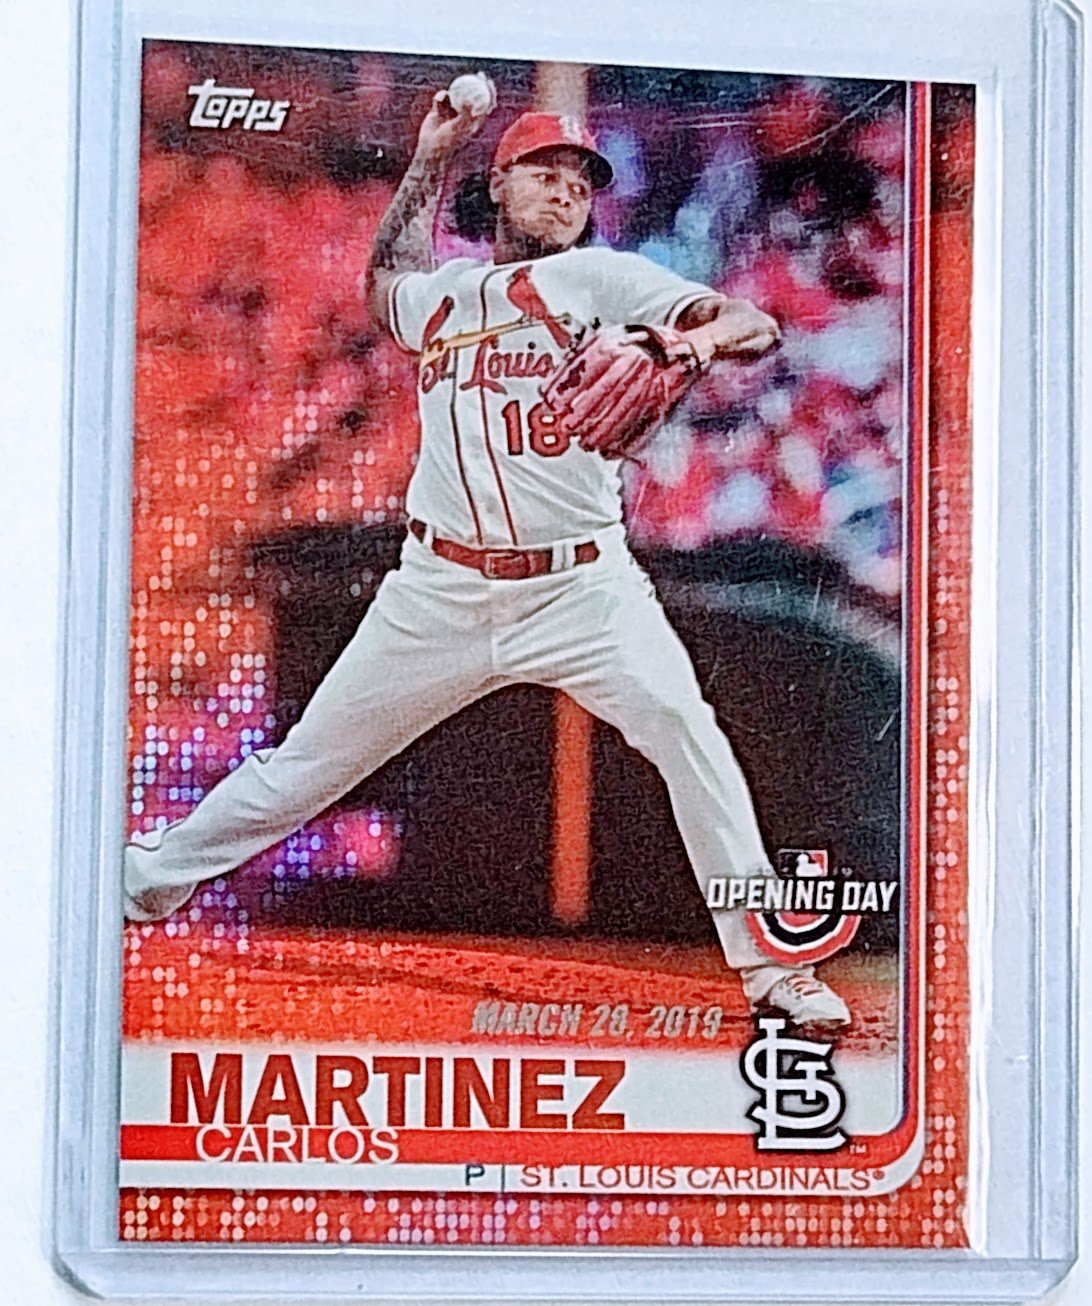 2019 Topps Opening Day Carlos Martinez Red Foil Refractor Baseball Trading Card TPTV simple Xclusive Collectibles   